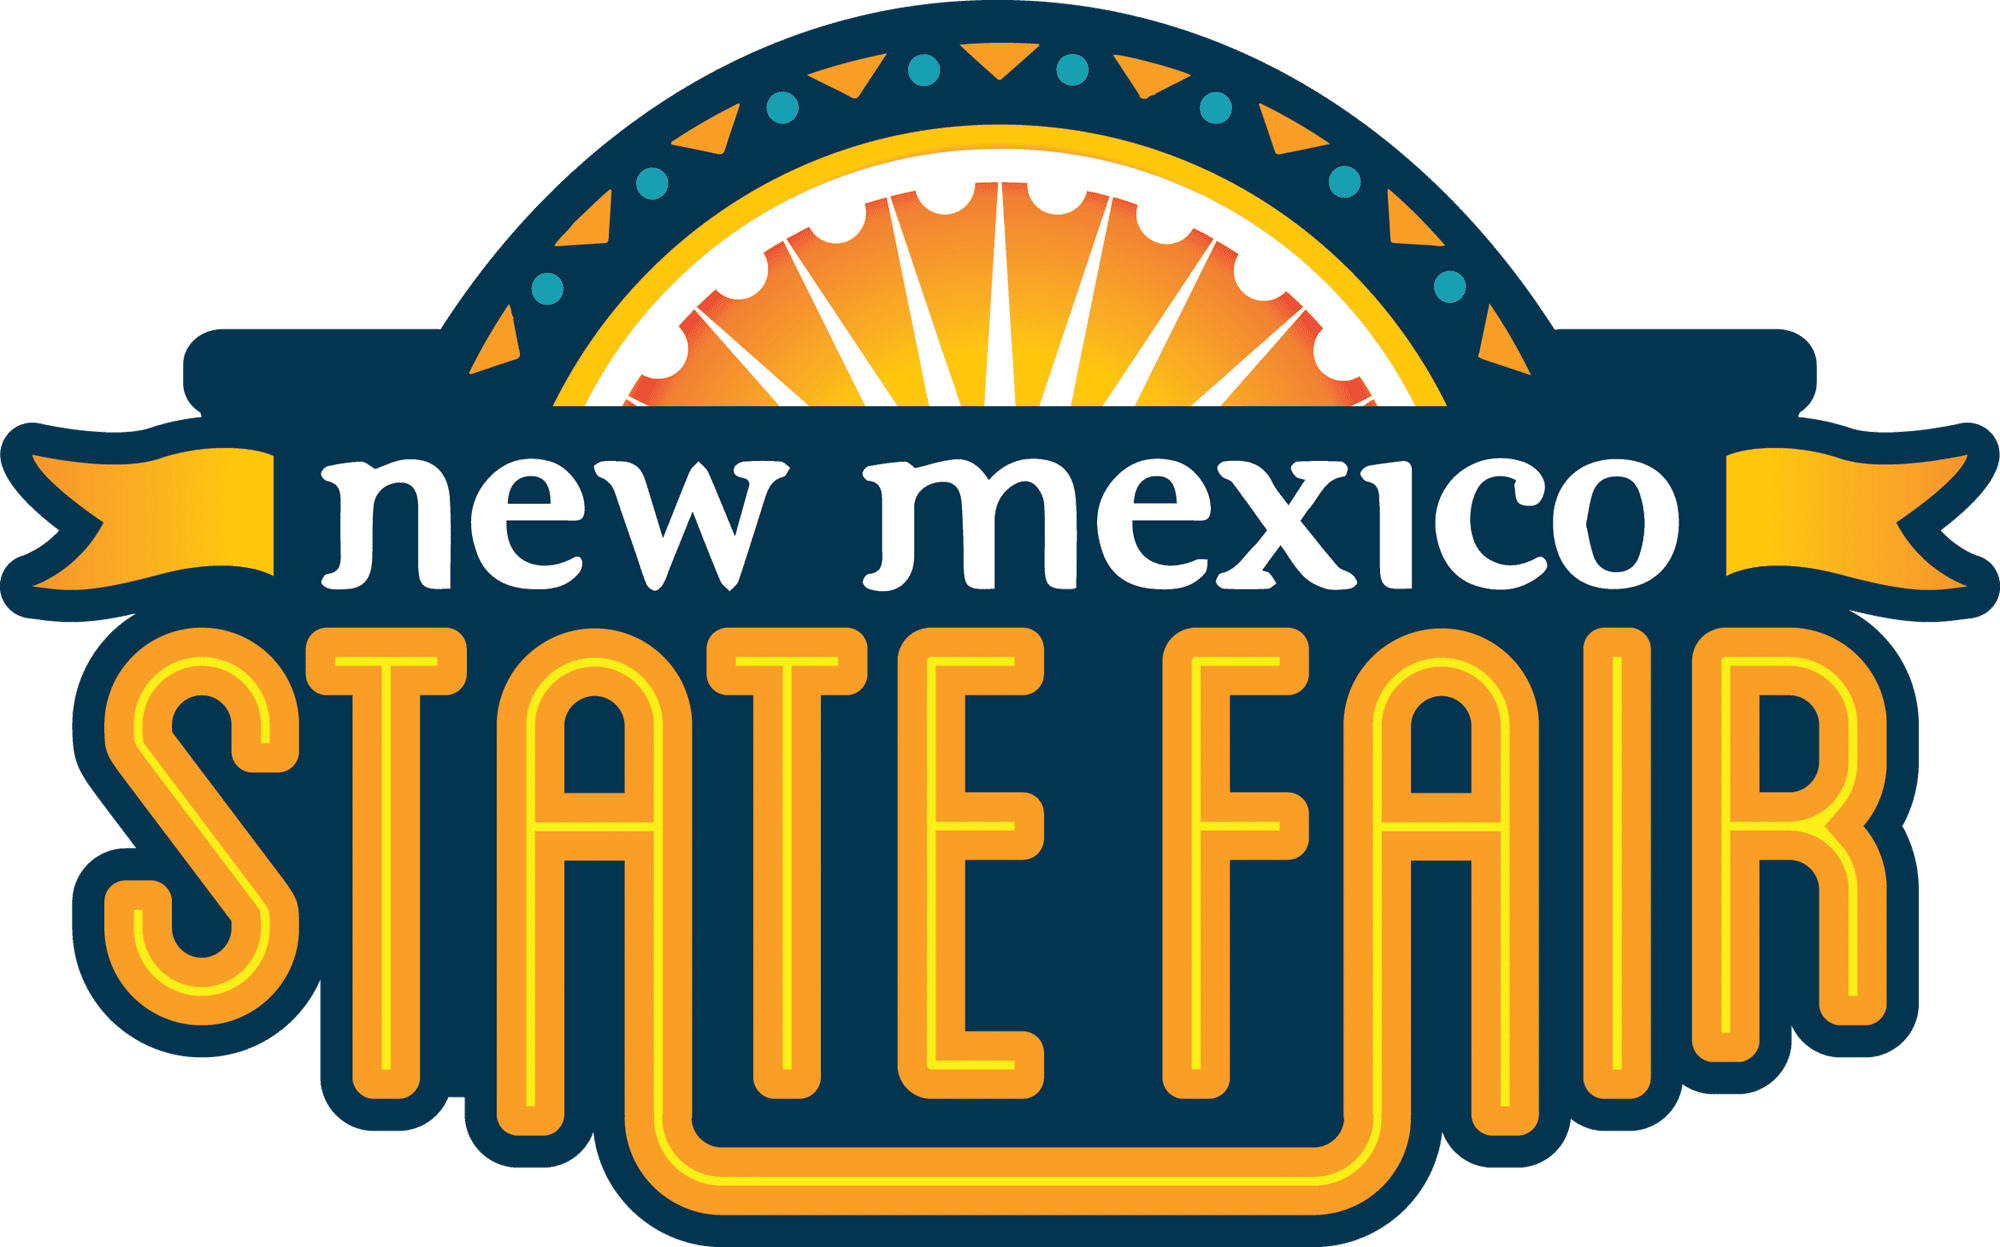 NM State Fair opening weekend parade and discount days